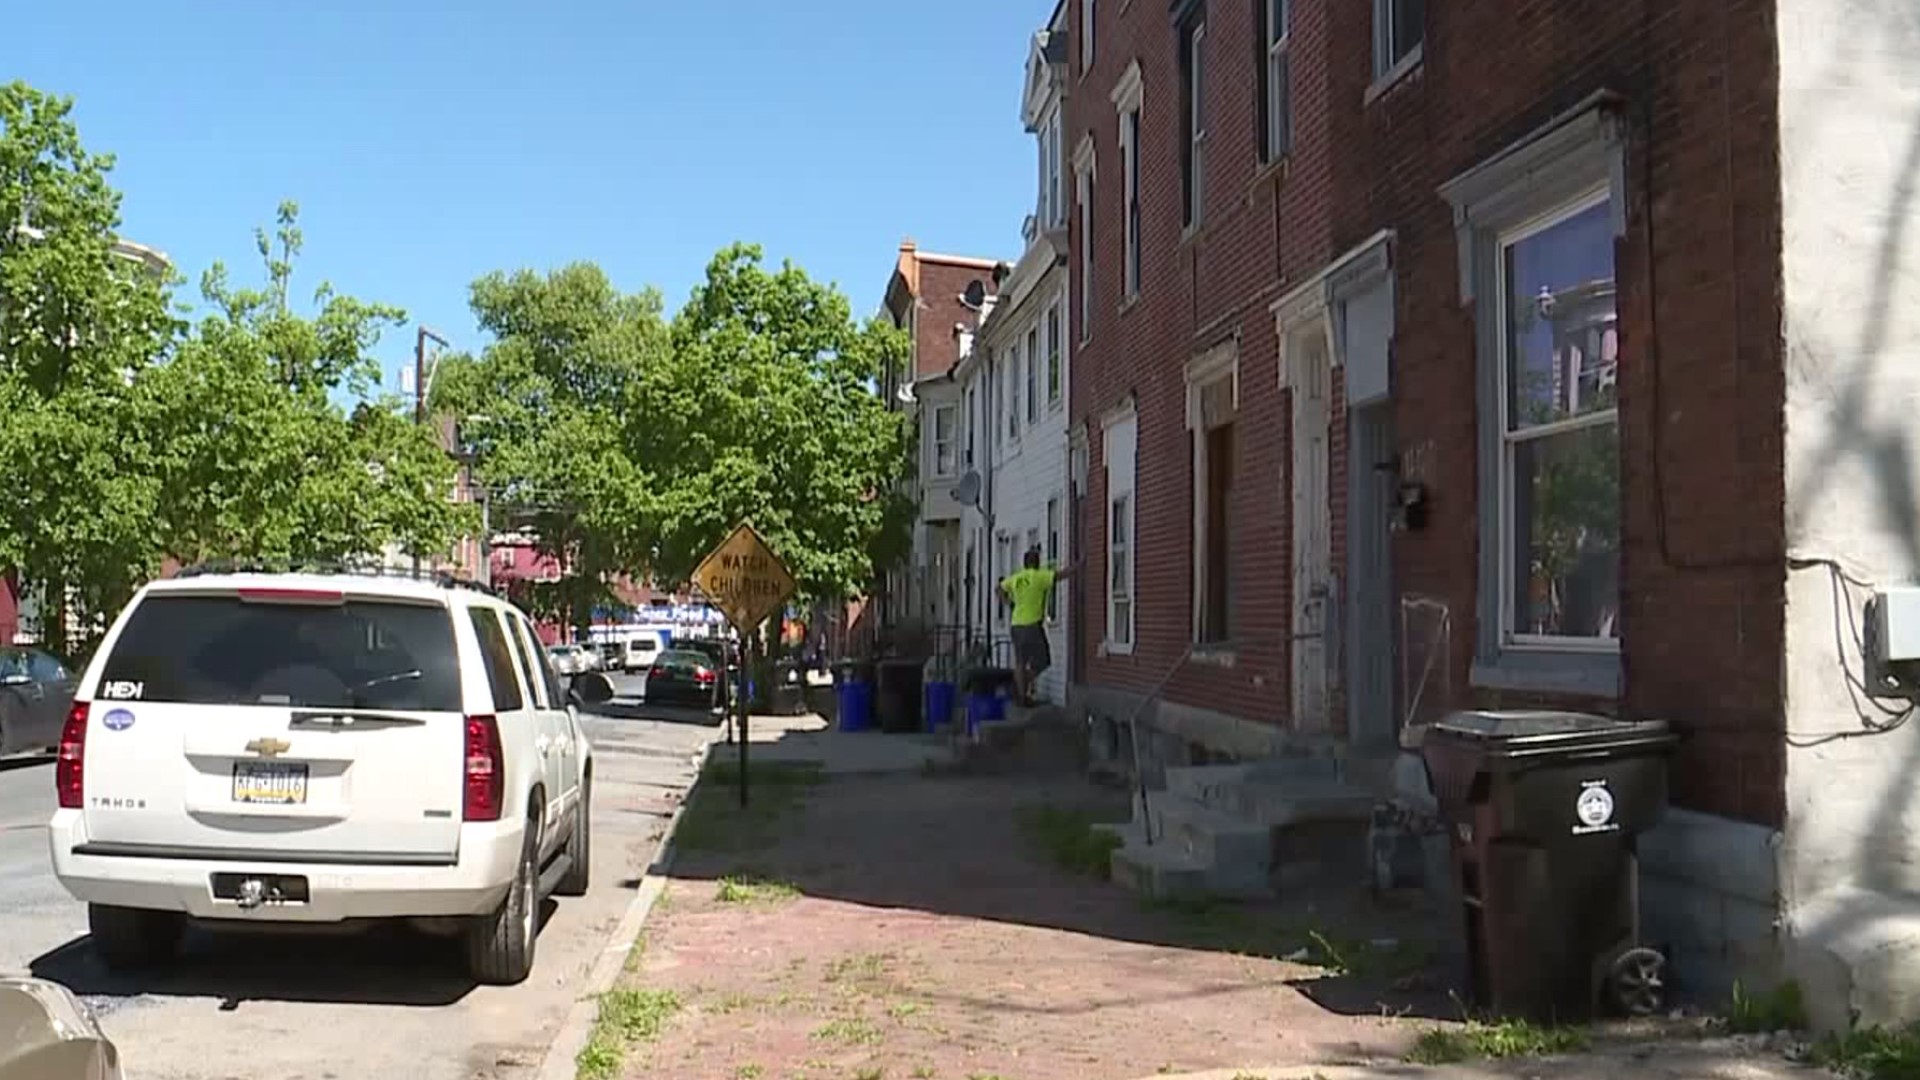 Mayor Wanda Williams and the head of the Harrisburg Redevelopment Authority toured the Allison Hill neighborhood on foot in hopes of addressing its ongoing issues.